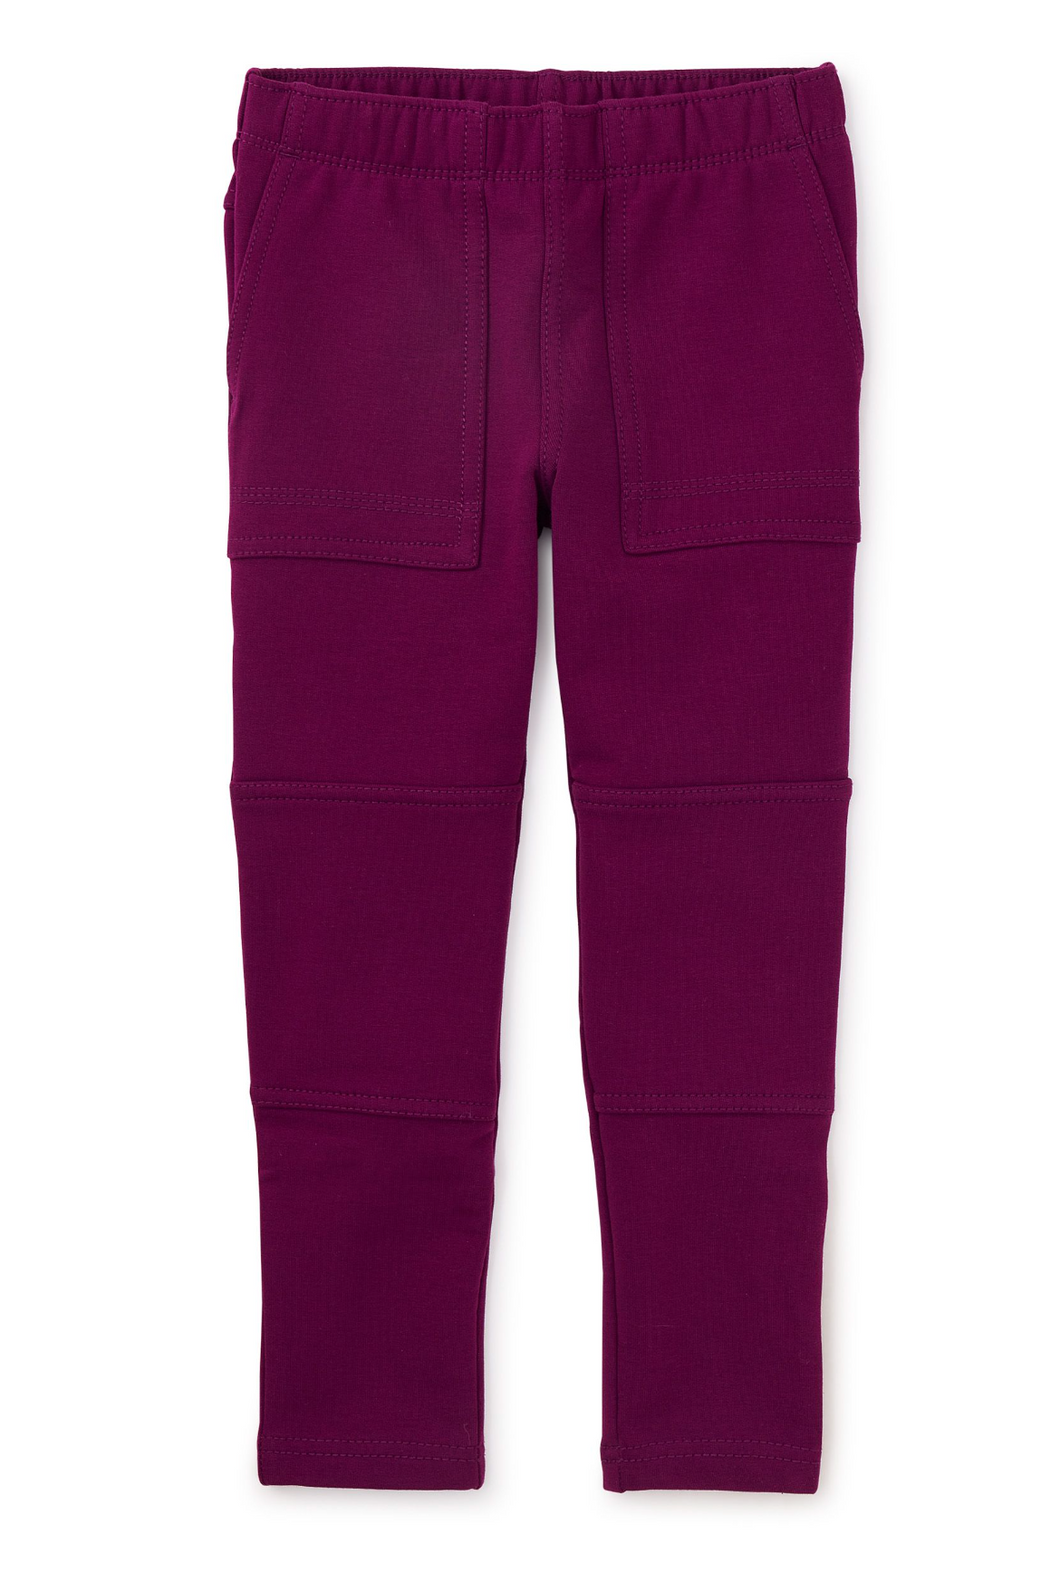 Tea Collection Playwear Jeggings Cosmic Berry